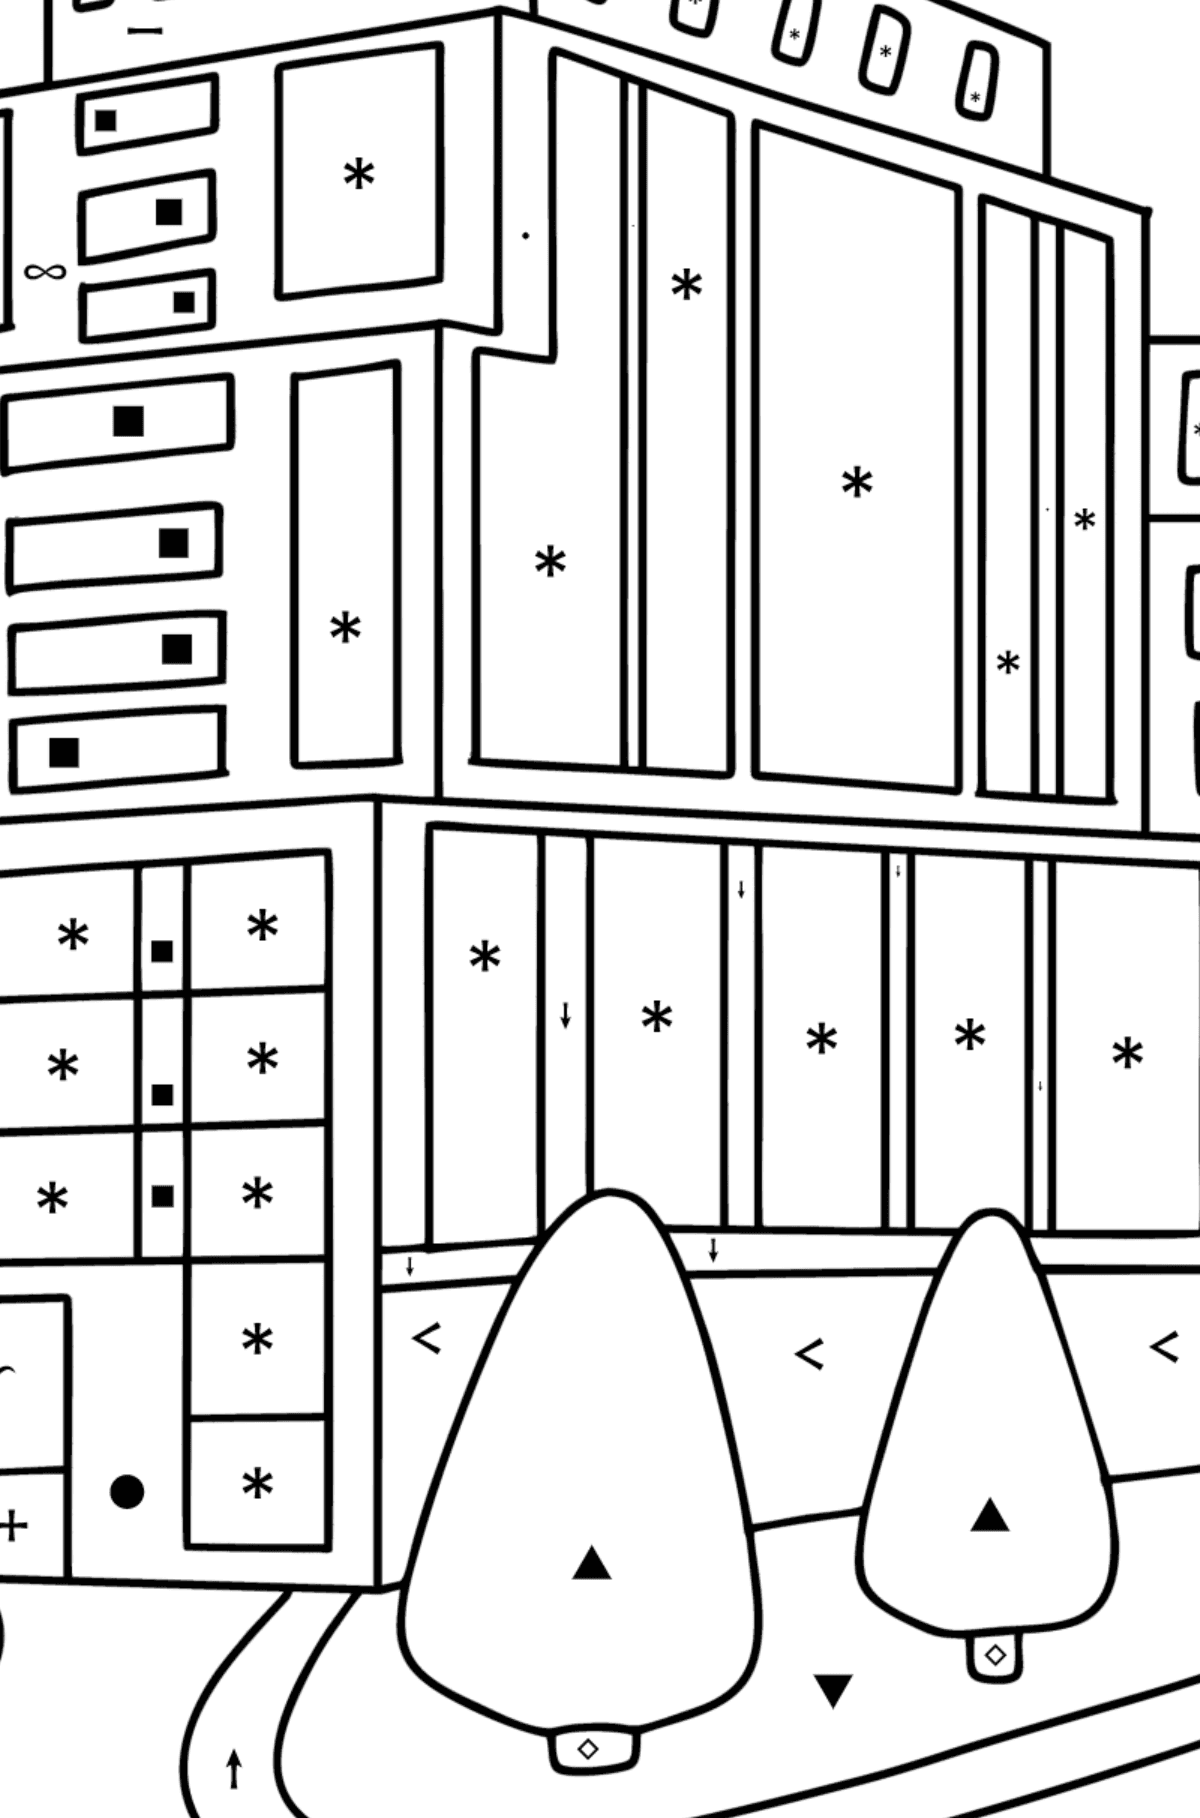 Modern Houses coloring page - Coloring by Symbols for Kids